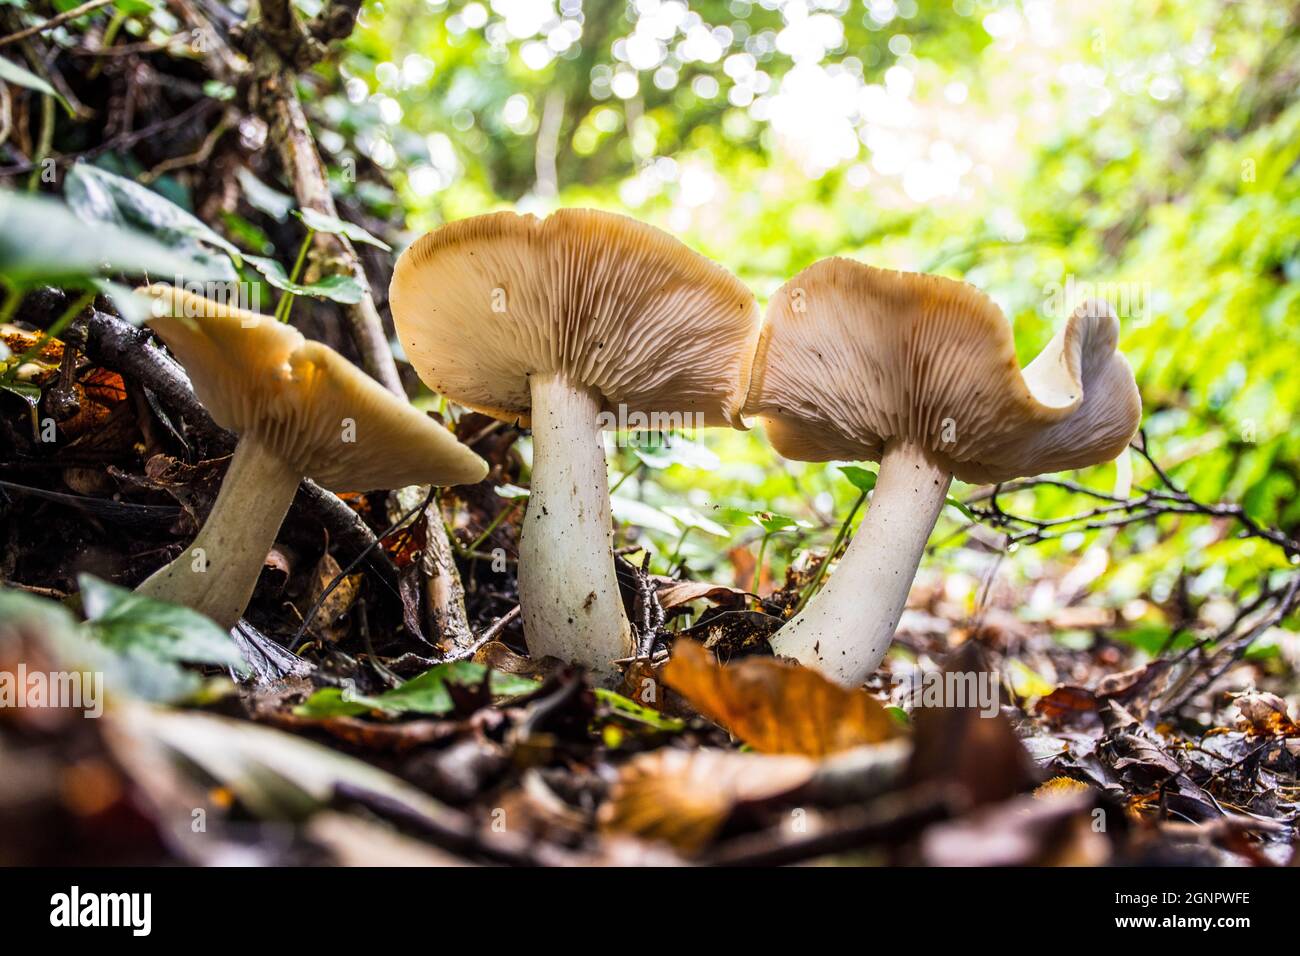 Russula betularum, commonly known as the birch brittlegill, wild mushrooms on forest floor in County Donegal, Ireland Stock Photo